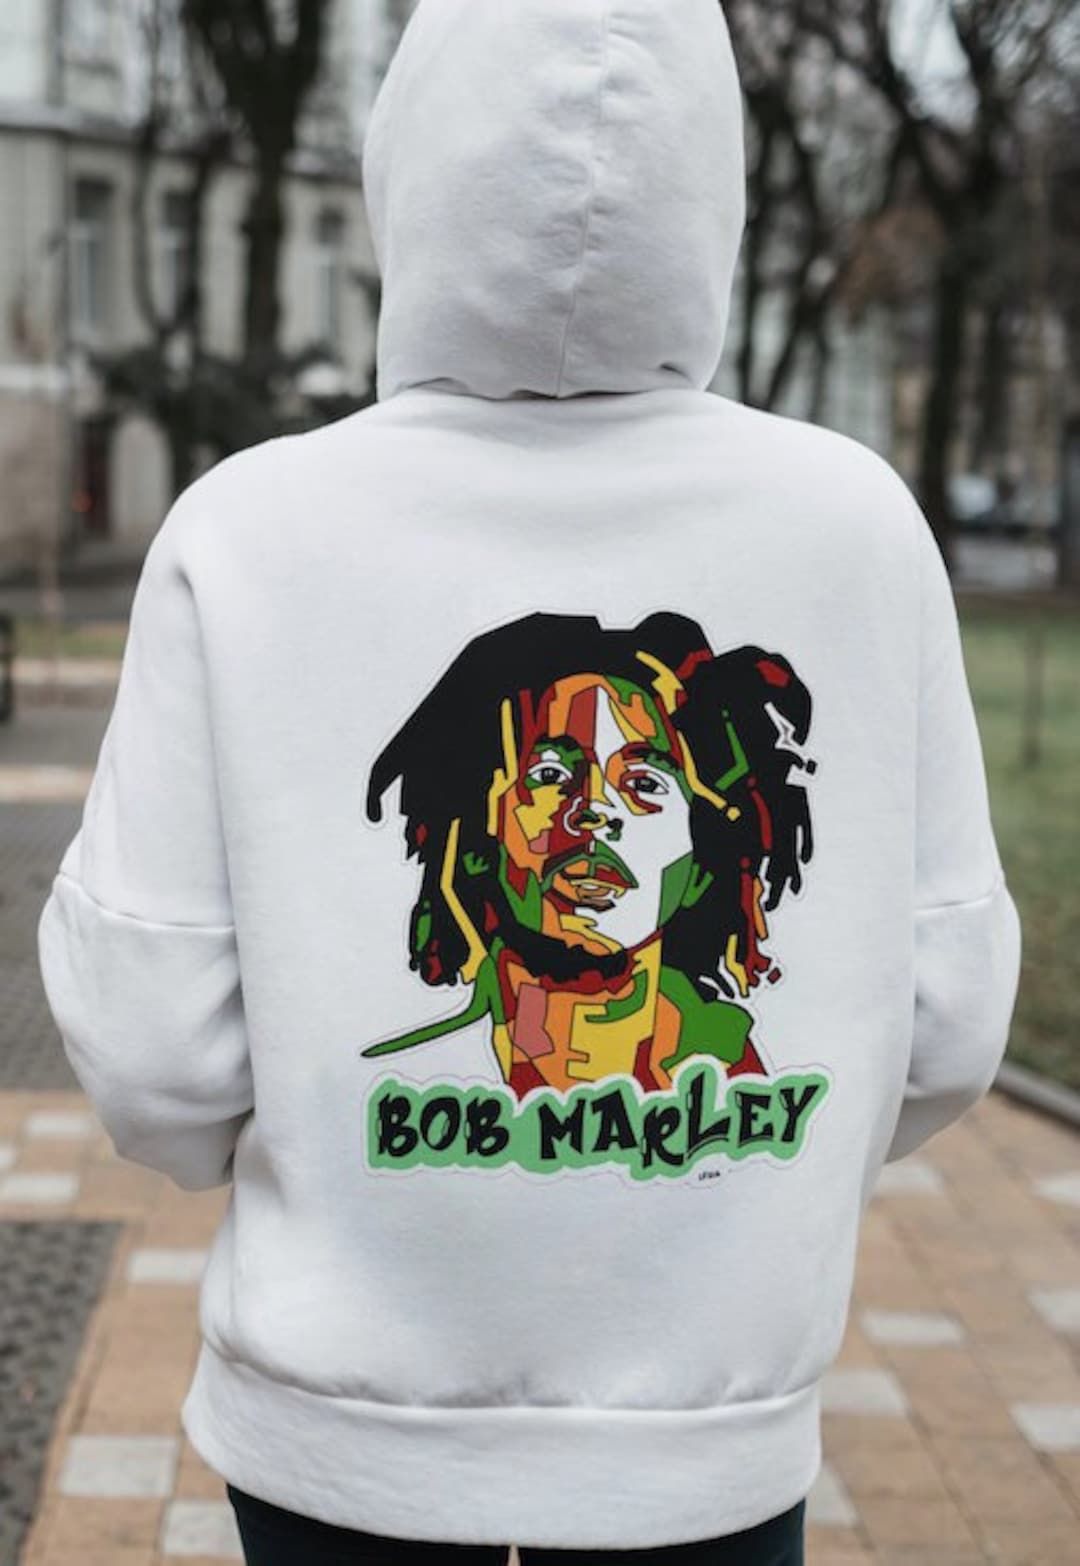 Bob Marley Handmade Jacket. Handcrafted by Indigenous Hands 